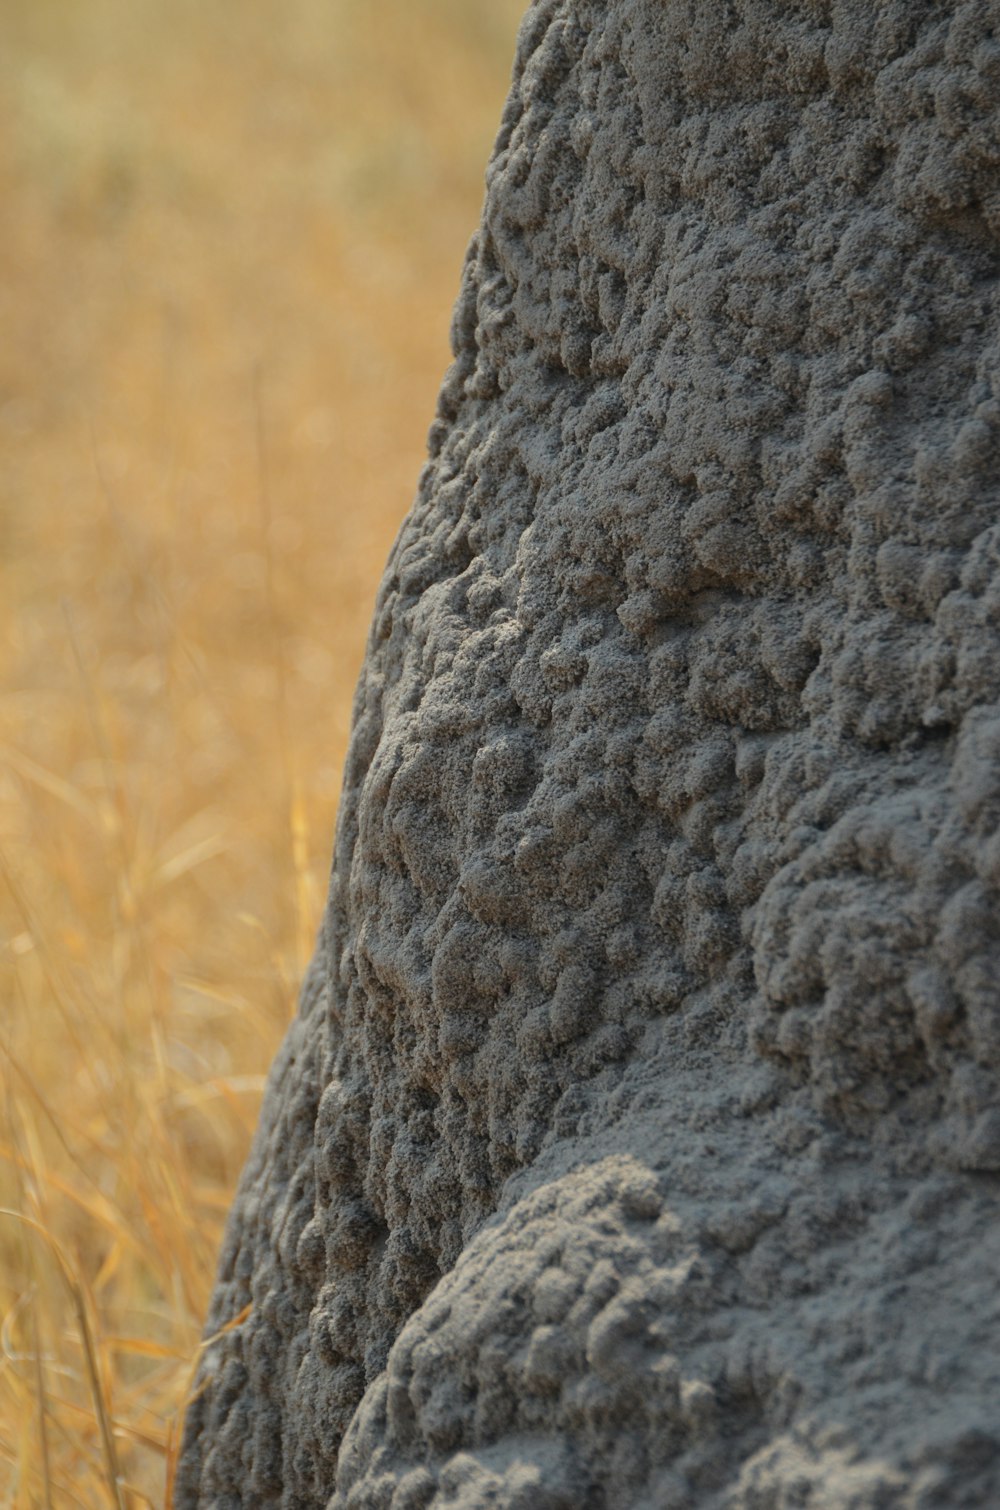 a close up of an elephant's face in a field